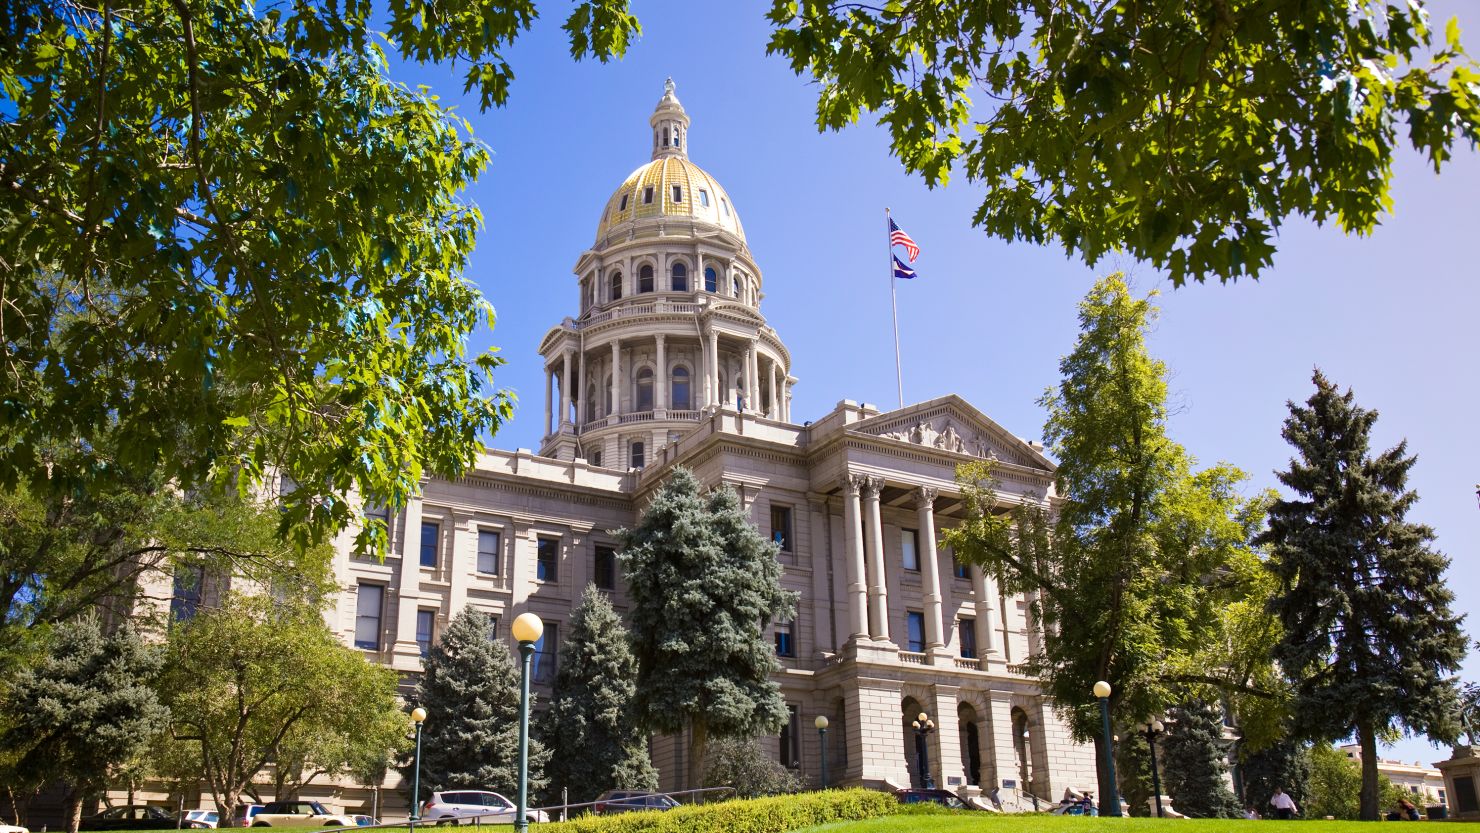 The Colorado State Capitol in Denver is seen in this file photo.